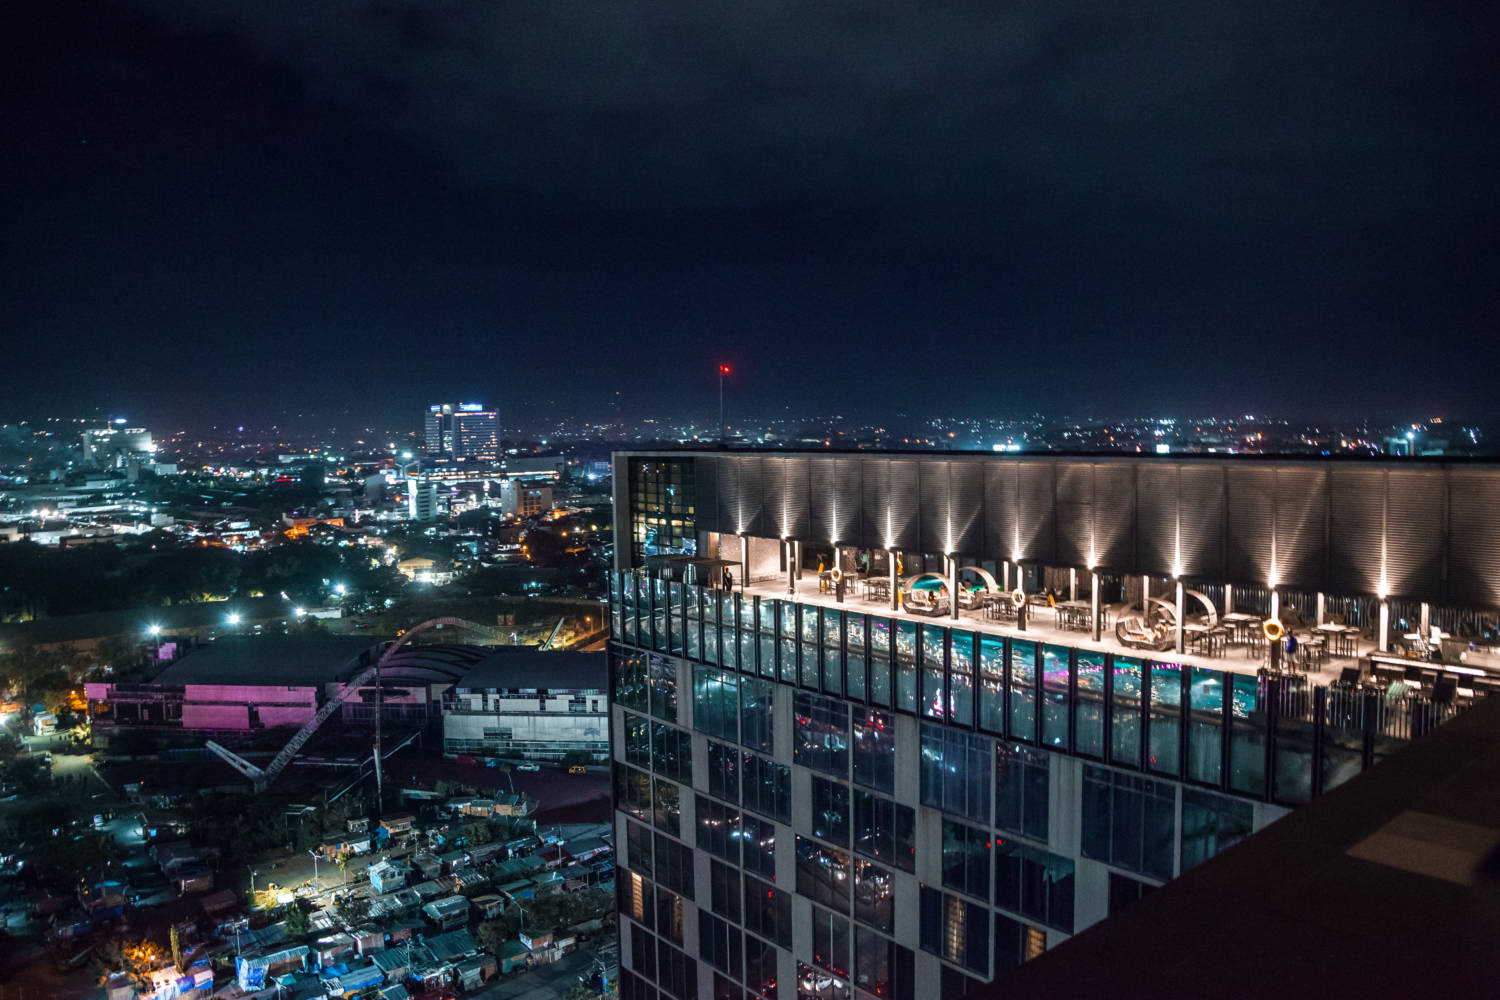 The Best Hotel In Cebu City To Stay At (With A BEAUTIFUL Rooftop) - Bai Hotel Cebu